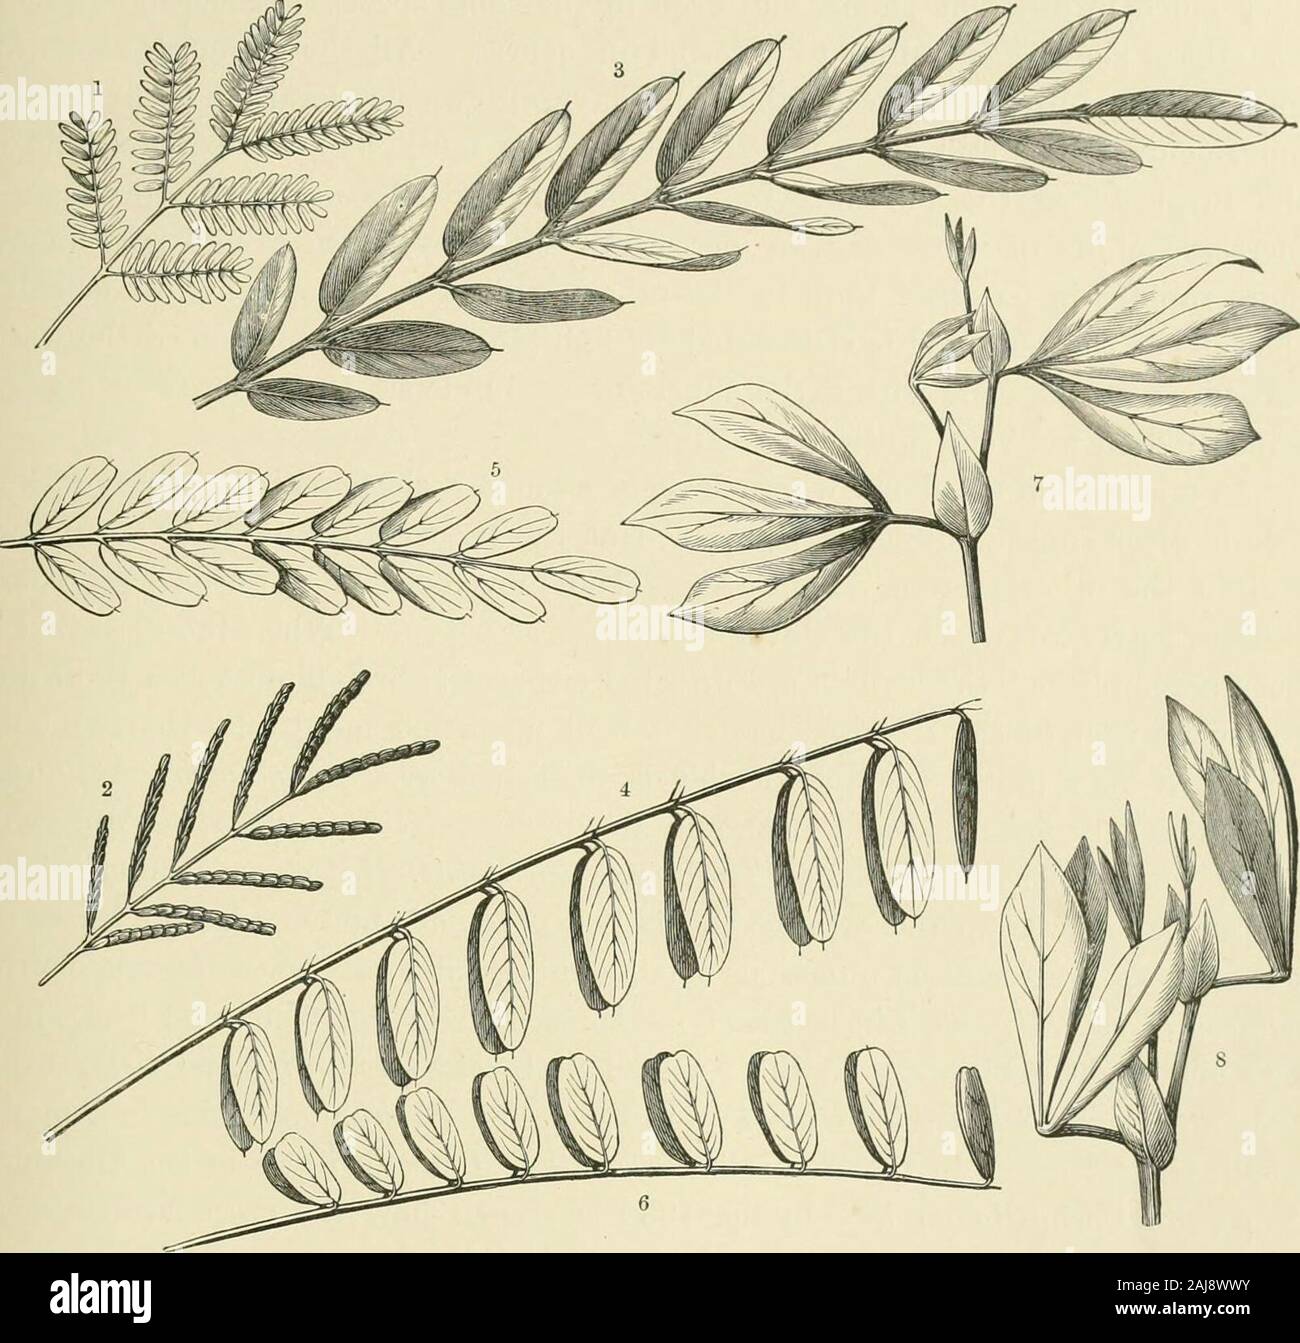 The natural history of plants, their forms, growth, reproduction, and distribution; . Fig. 133.—Alteration of Position of Leaflets in Compound Leaves. I Leaf of 3Hmosa Lindheimeri, seen from above, in day position. 2 The same in night position, s Leaf of Amorpha fruticosain day position. * The same in niglit position. 6 Leaf of Coronilla varia in day position. « The same in night position.7 Leaf of Tetragonolobus siliquosus in day position. « The same in night position. midrib is formed by the continuation of the bent bundle-strand, is inclined overin the direction of the concave half of the p Stock Photo